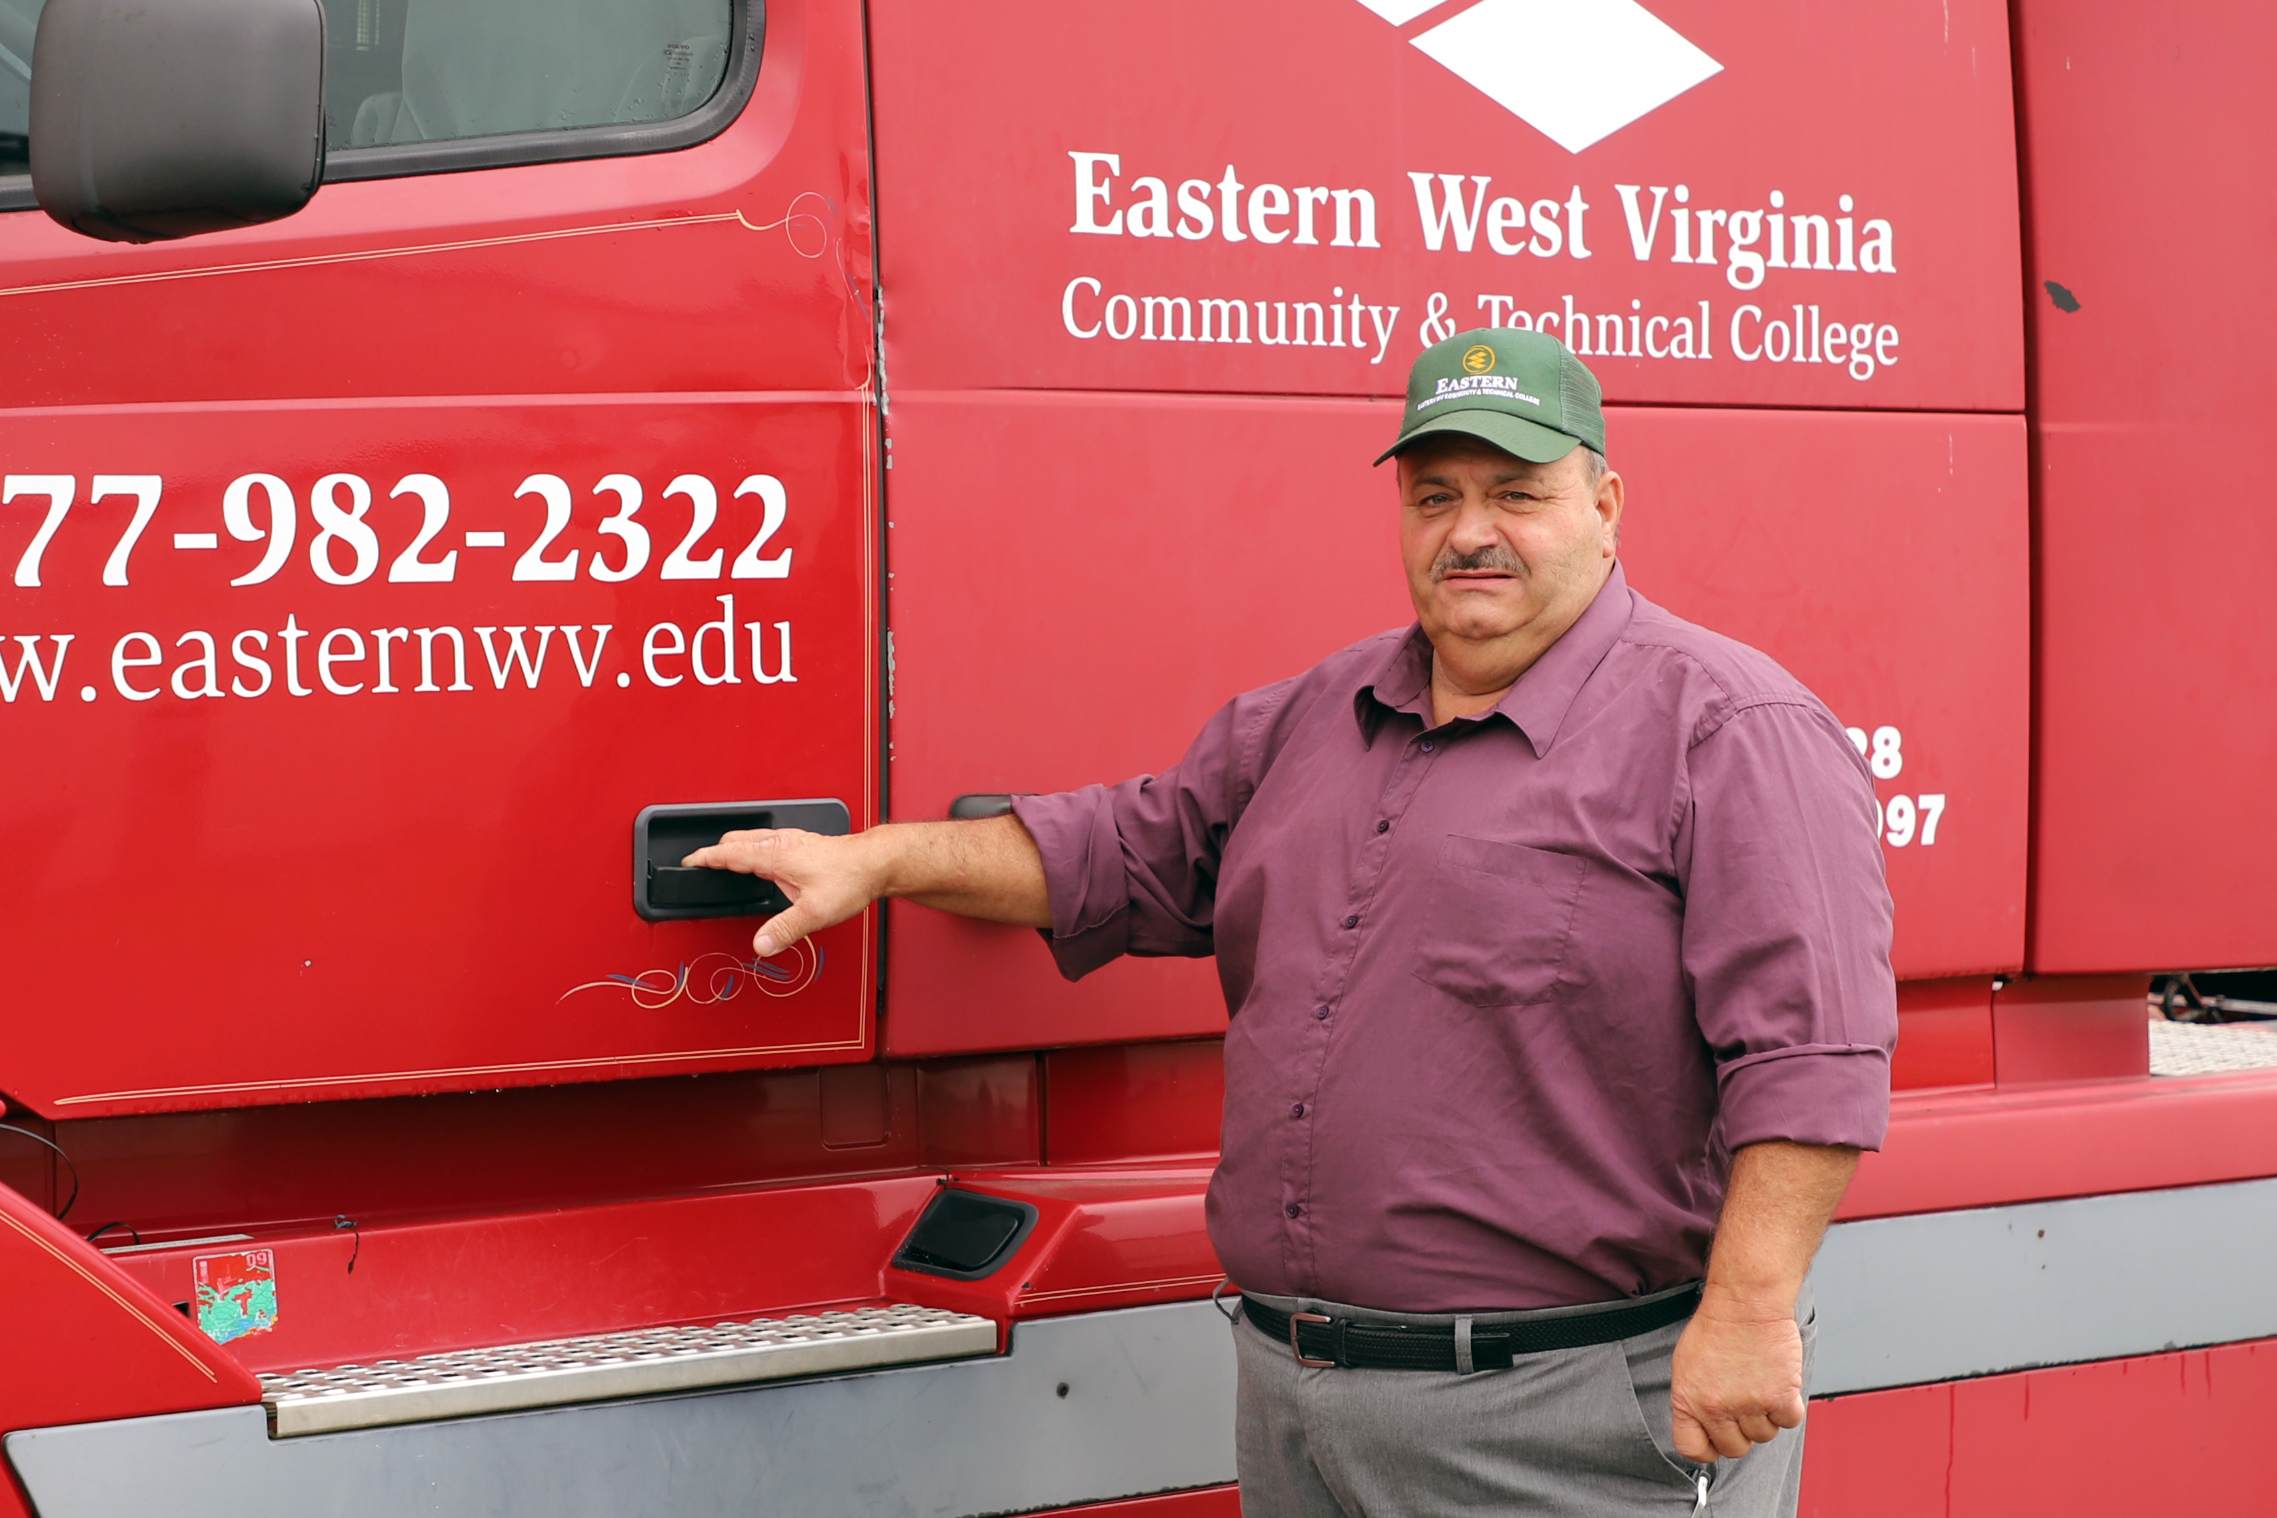 Man stands next to a large tractor trailer cab with his hand on the door handle of the truck.